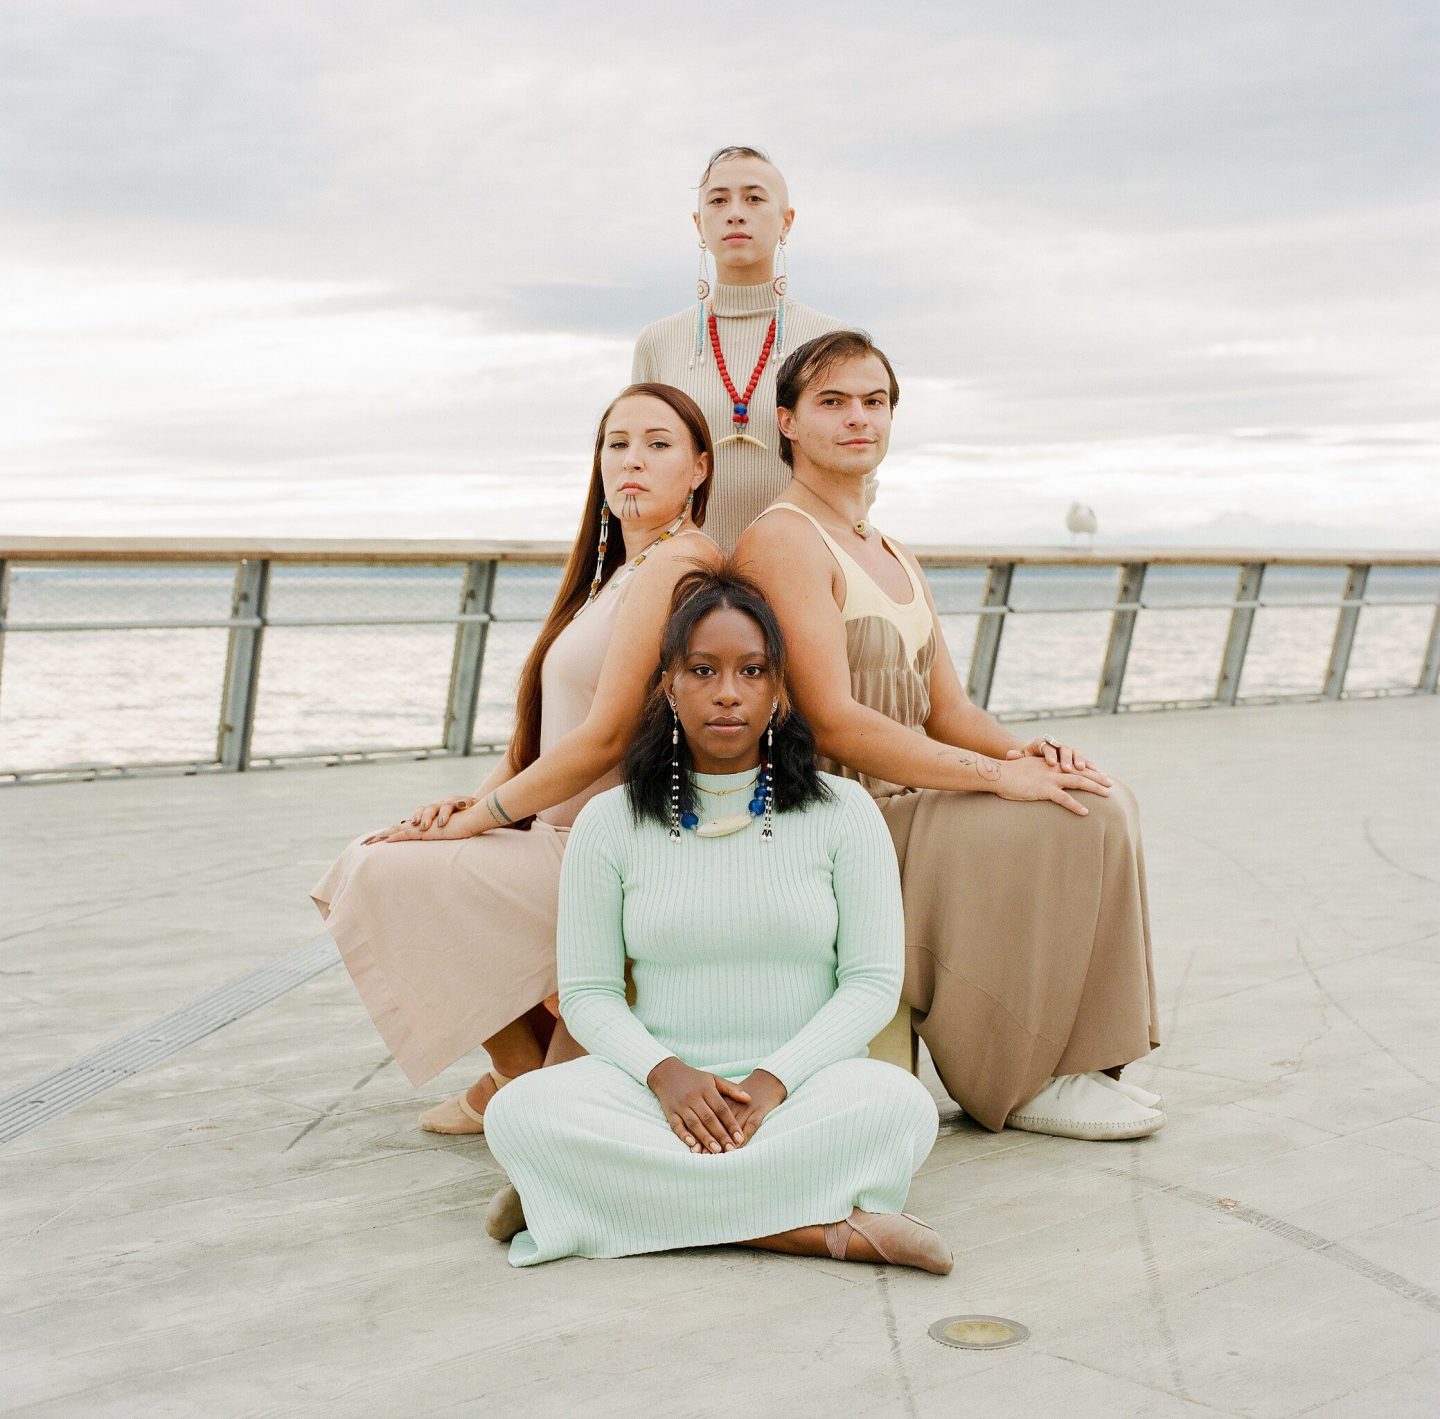 Four native people of a range of skin tones wear pastel colors, sitting and standing on the deck of a pier. The Salish Sea is visible in the background against a bright cloudy sky.